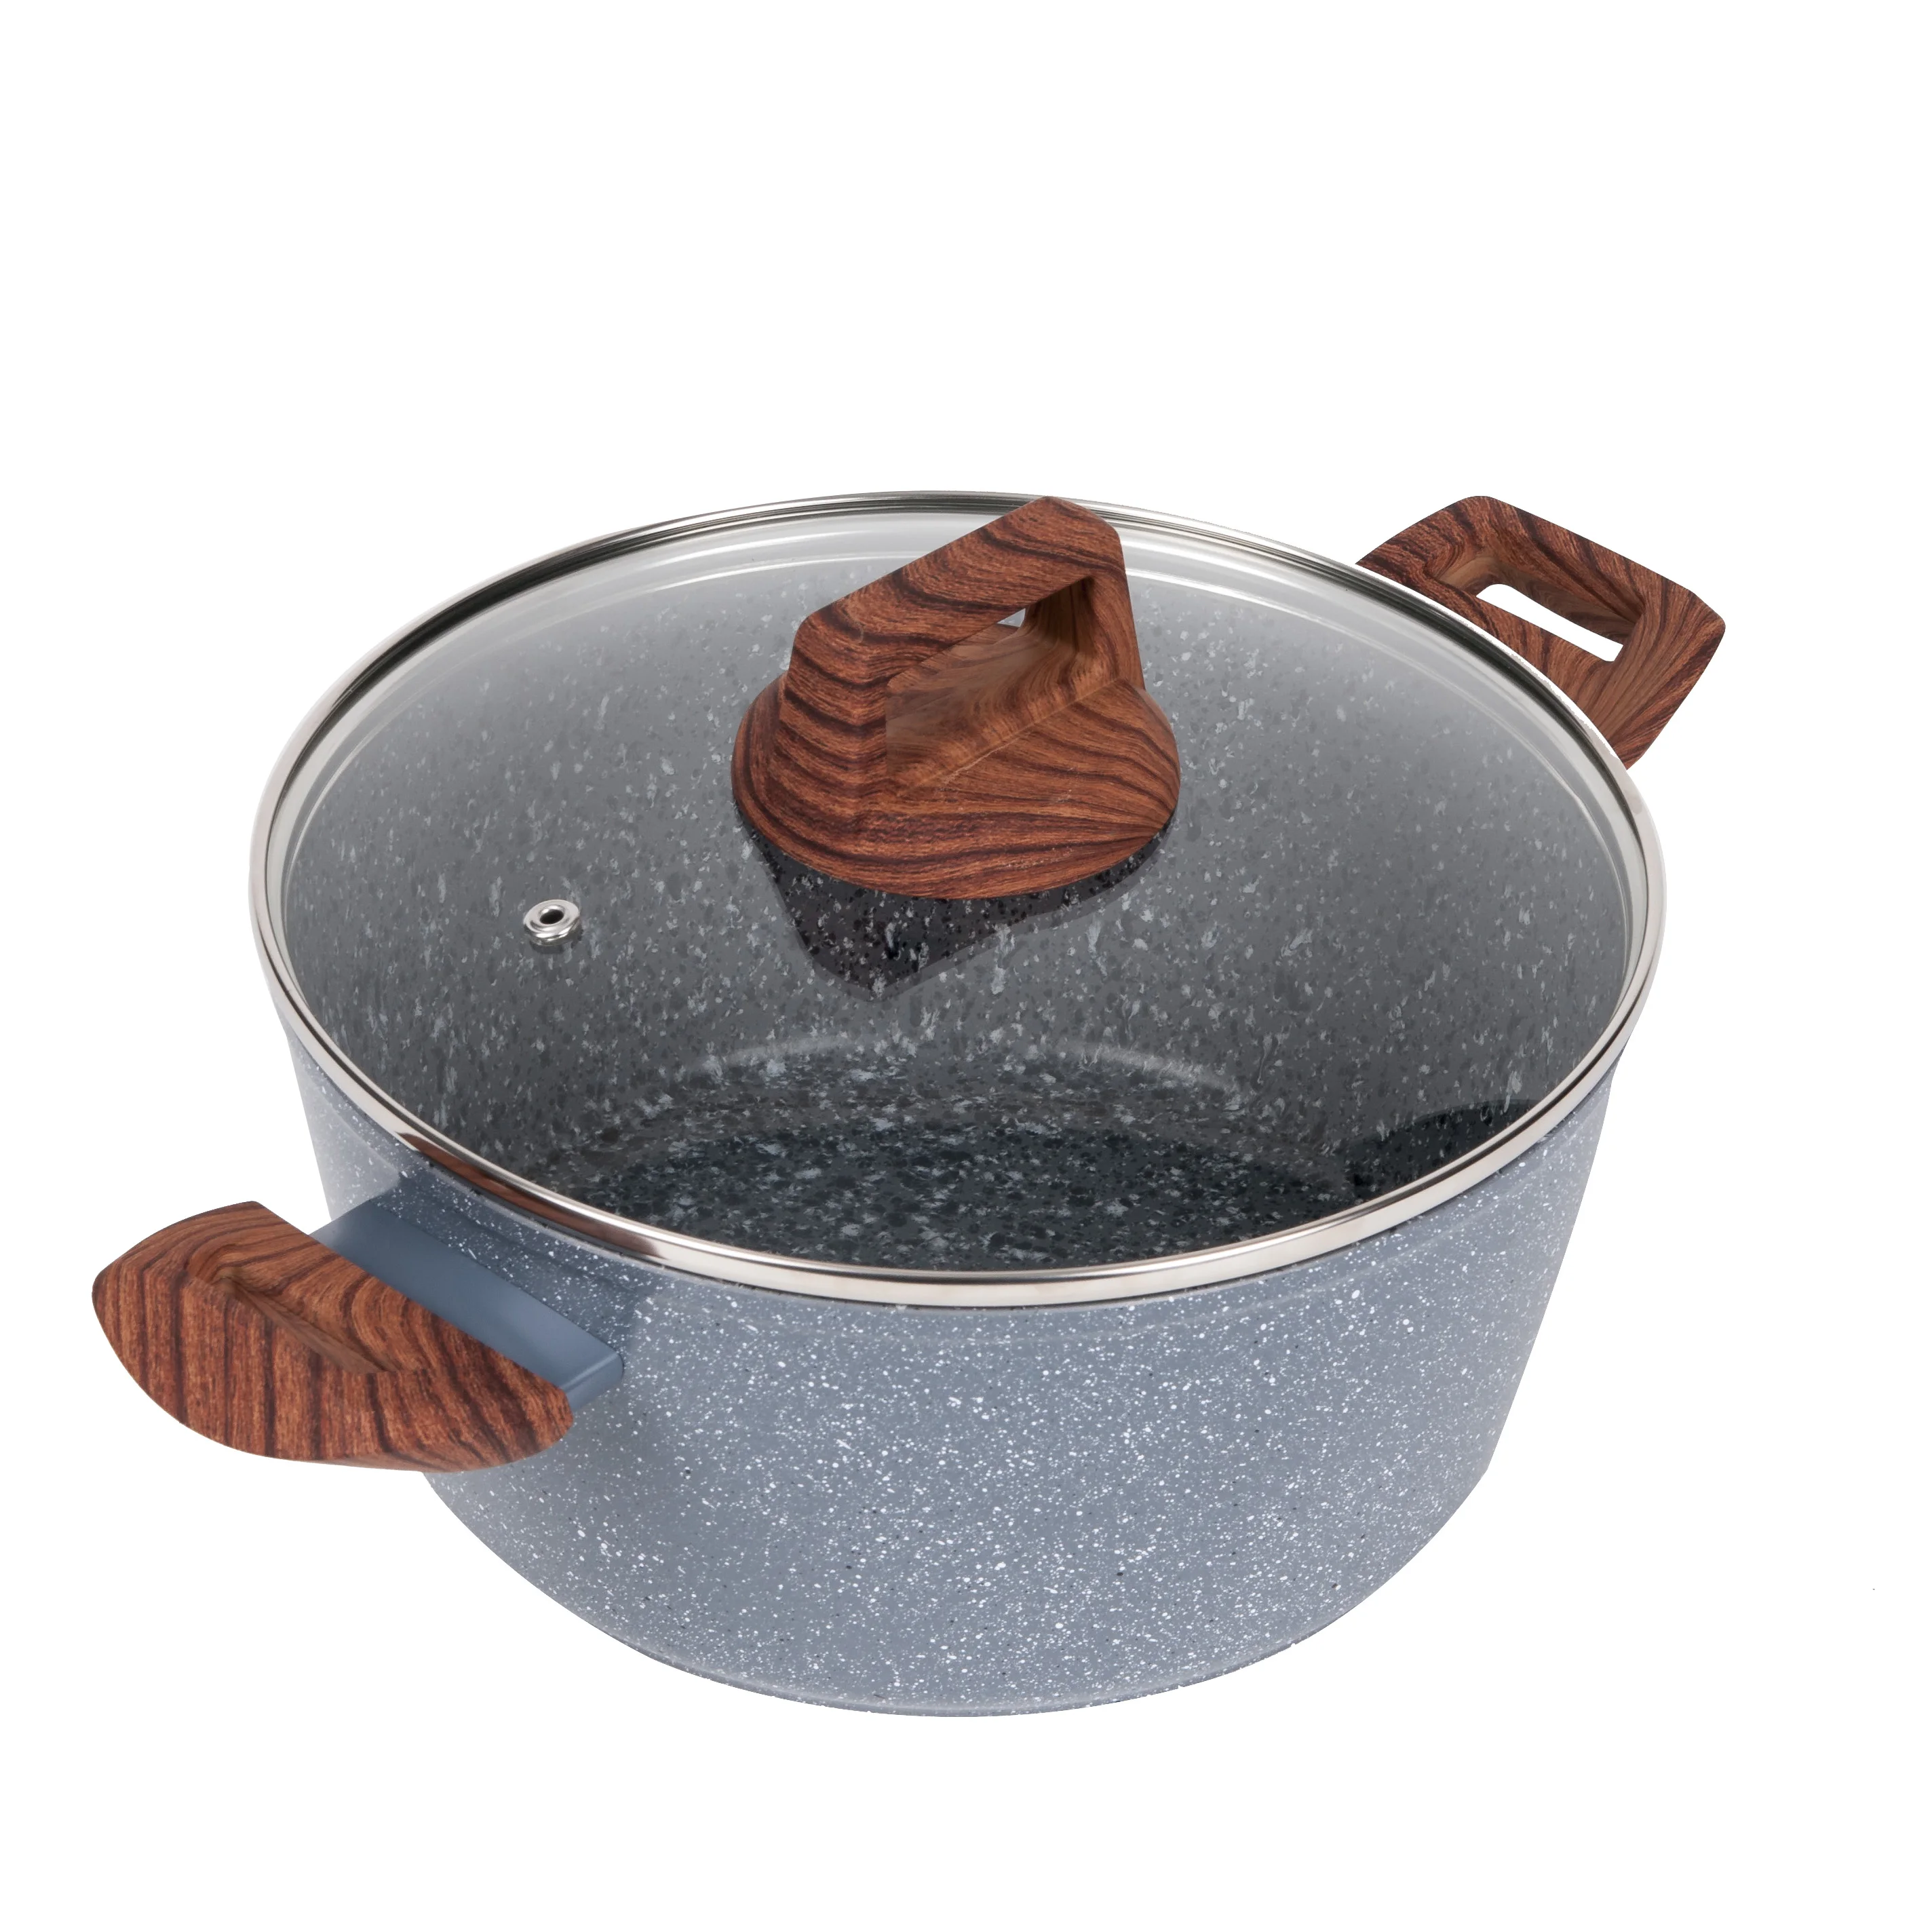 2022 new design Hot Pot Thermo Insulated Carrier Cast Casserole with Glass Lid and wooden effect handle (1600445439135)